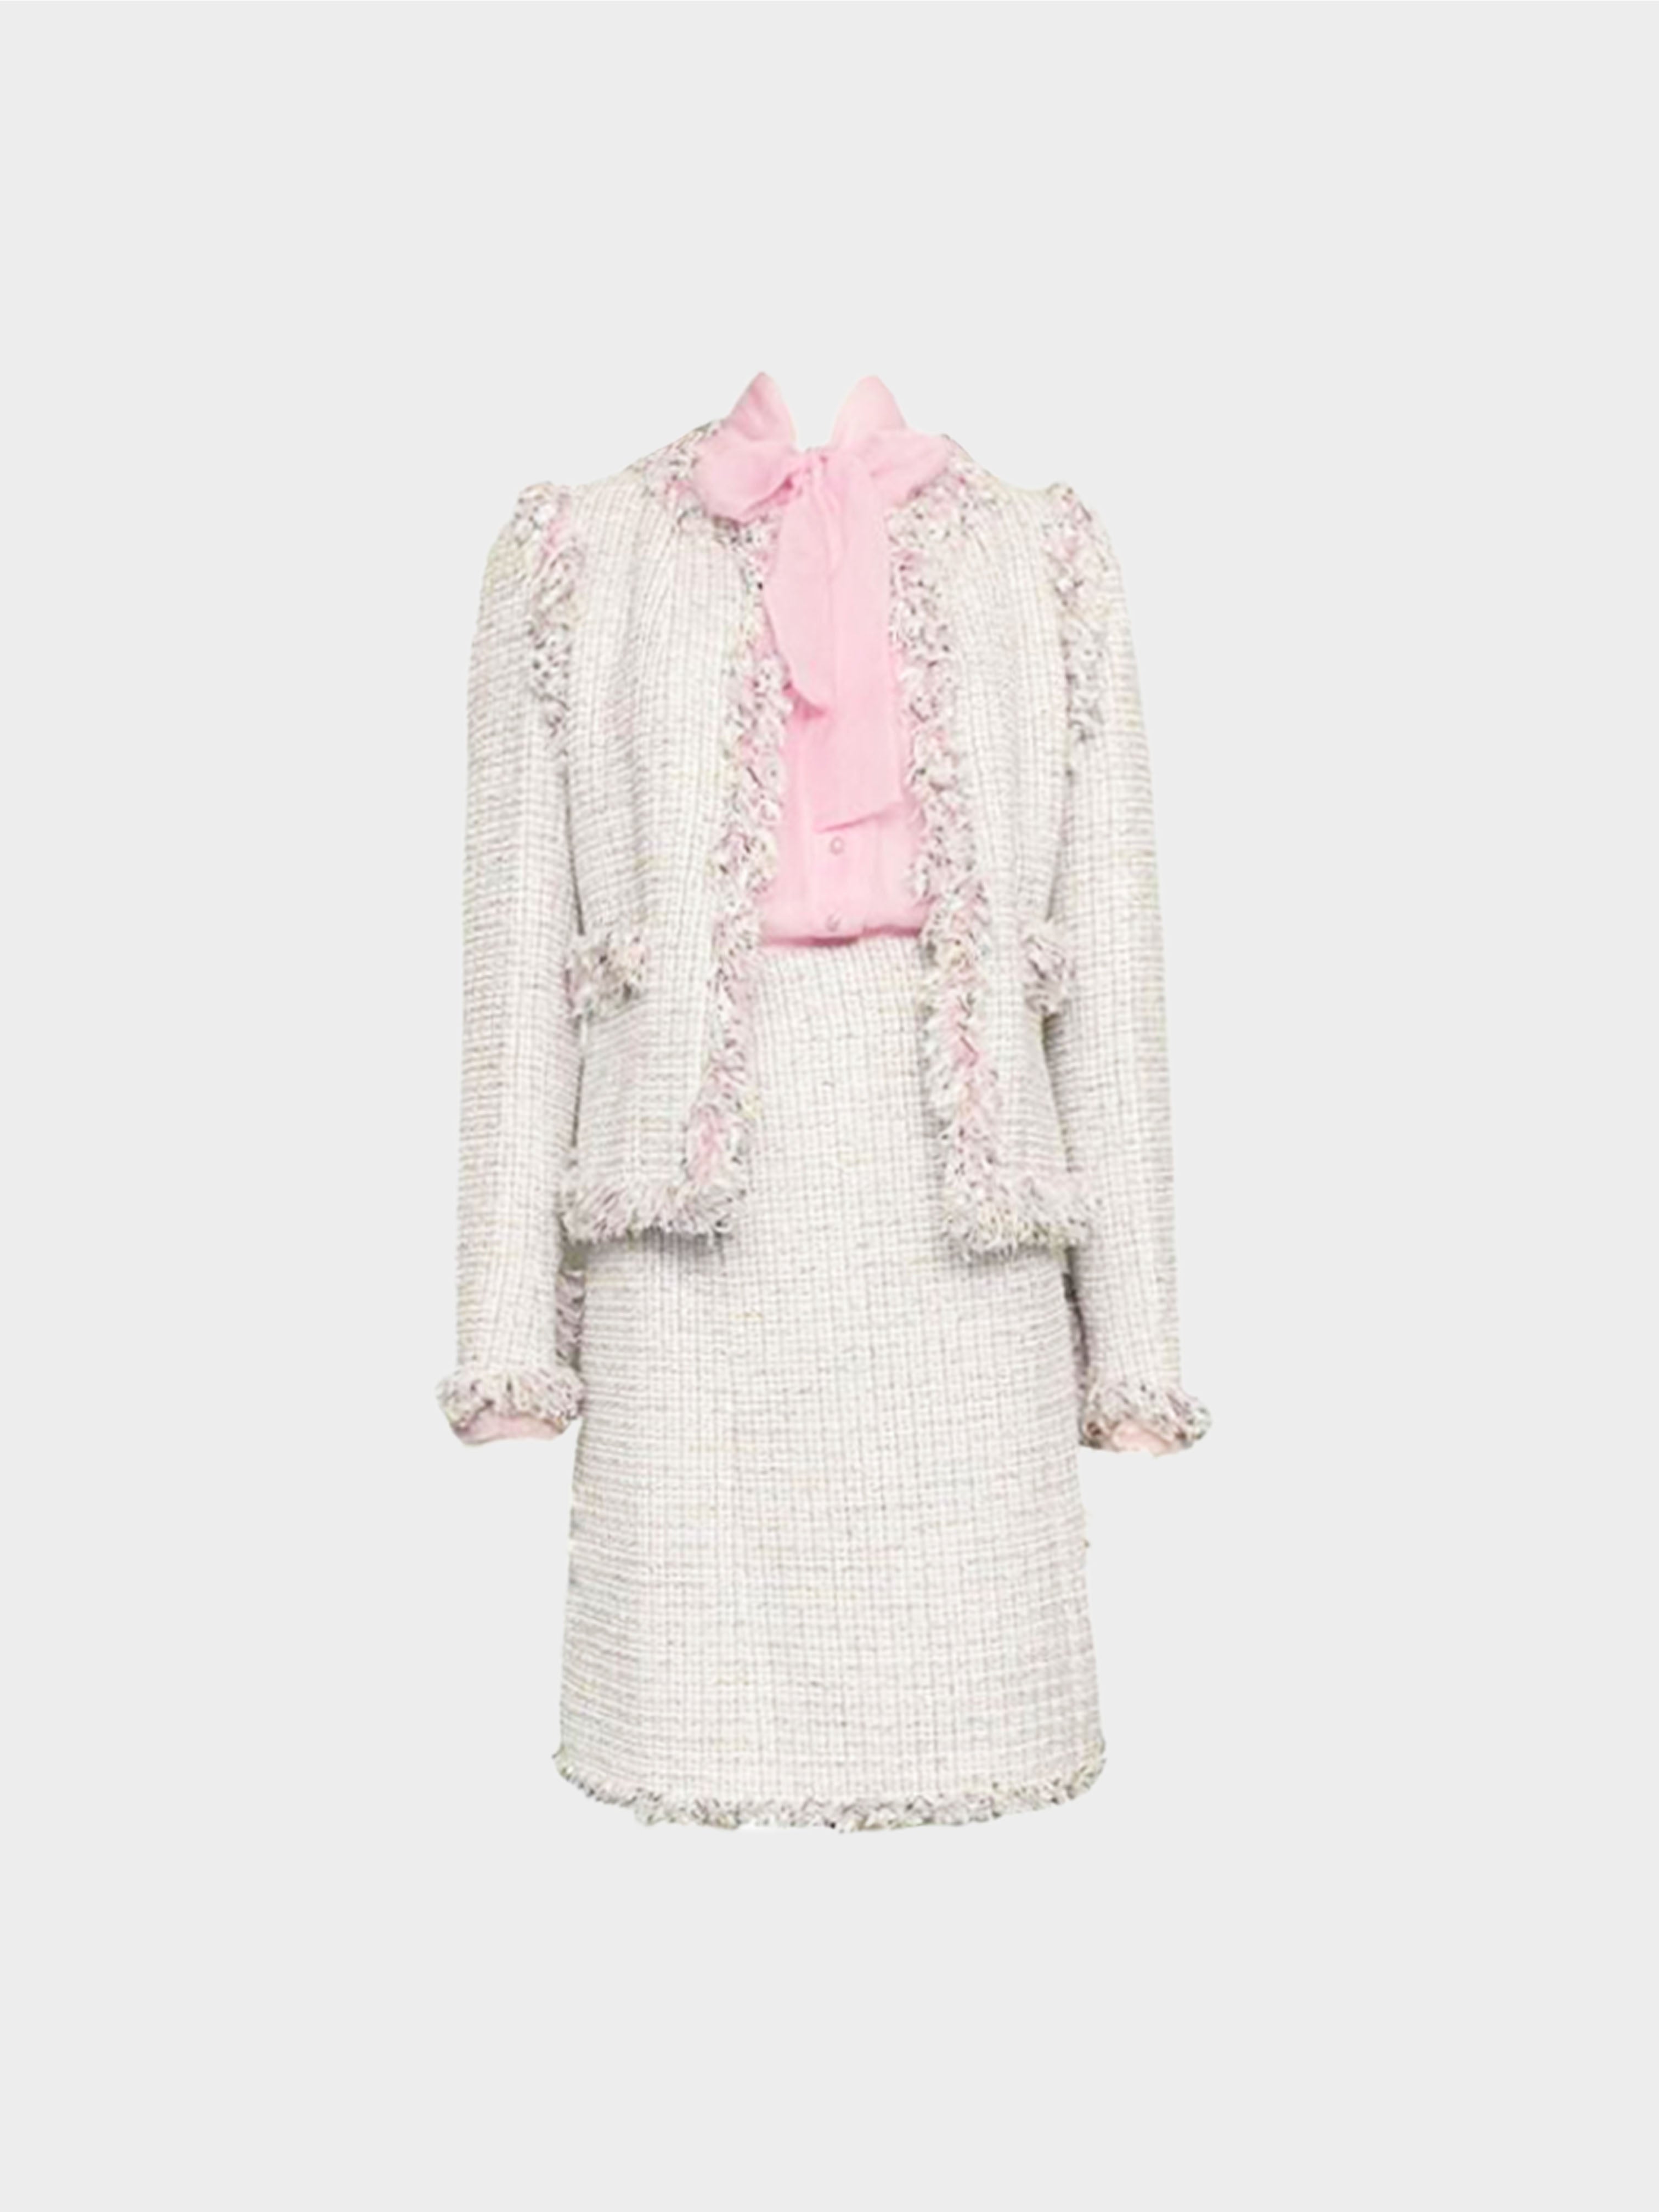 Rare Chanel Pink Tweed Skirt Suit Supermarket Collection